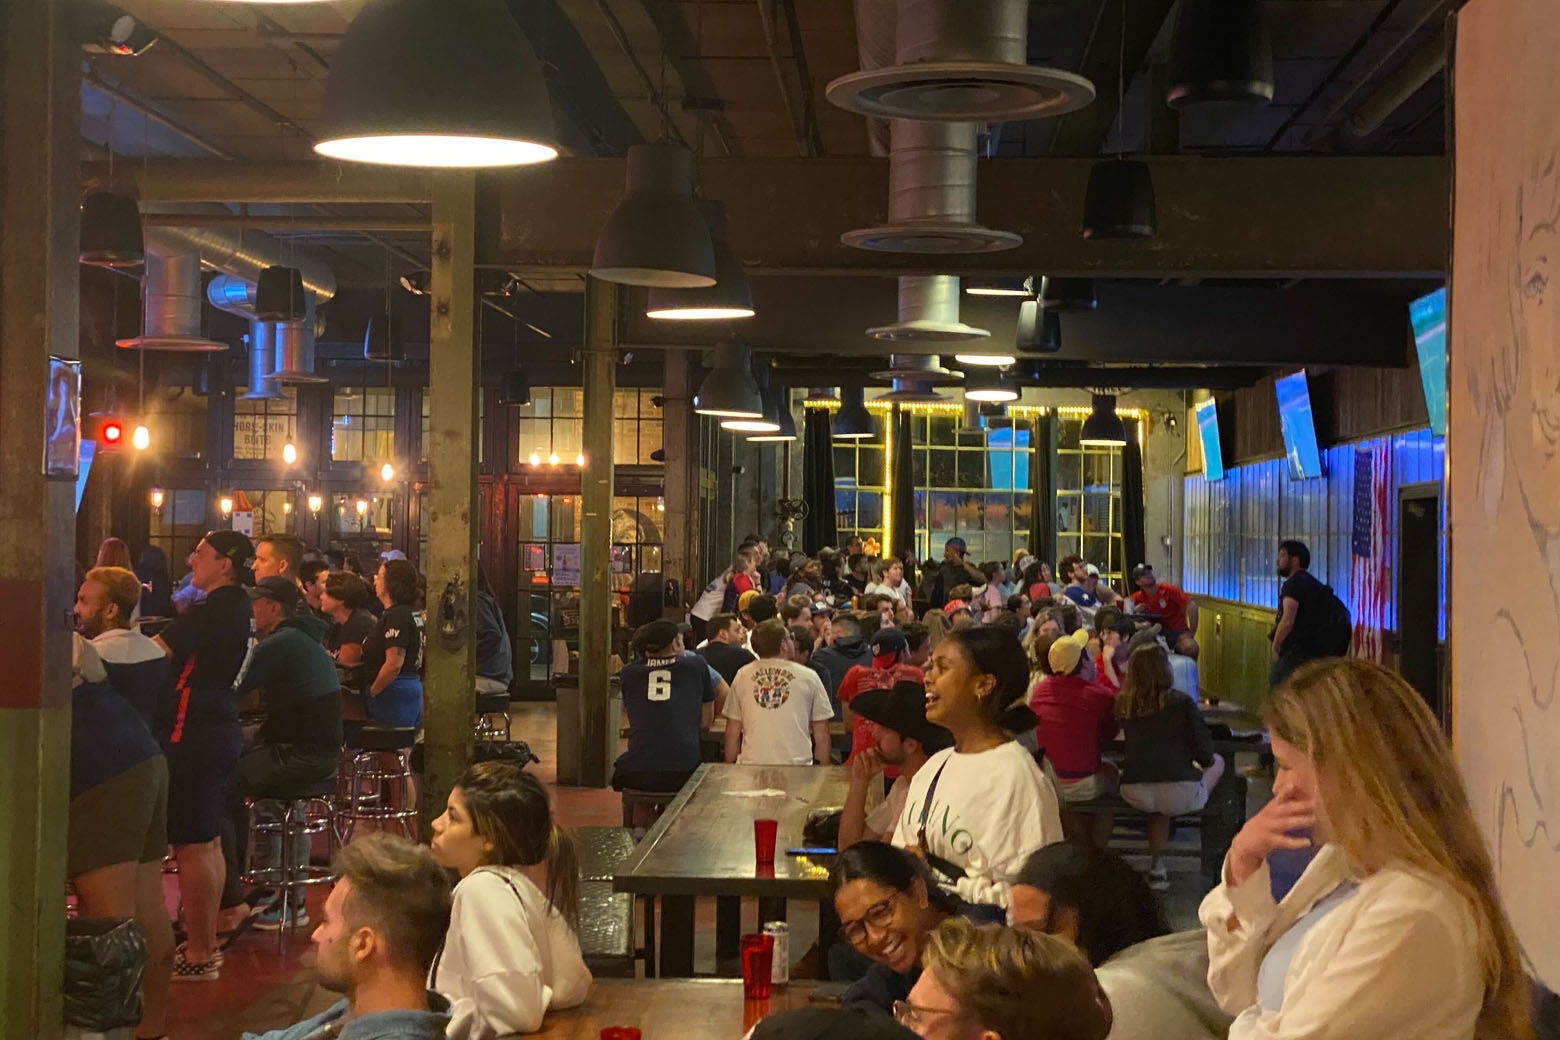 Well over 100 fans packed a local watch party at Franklin Hall bar in Northwest D.C. for the Women's World Cup. (WTOP/Luke Lukert)